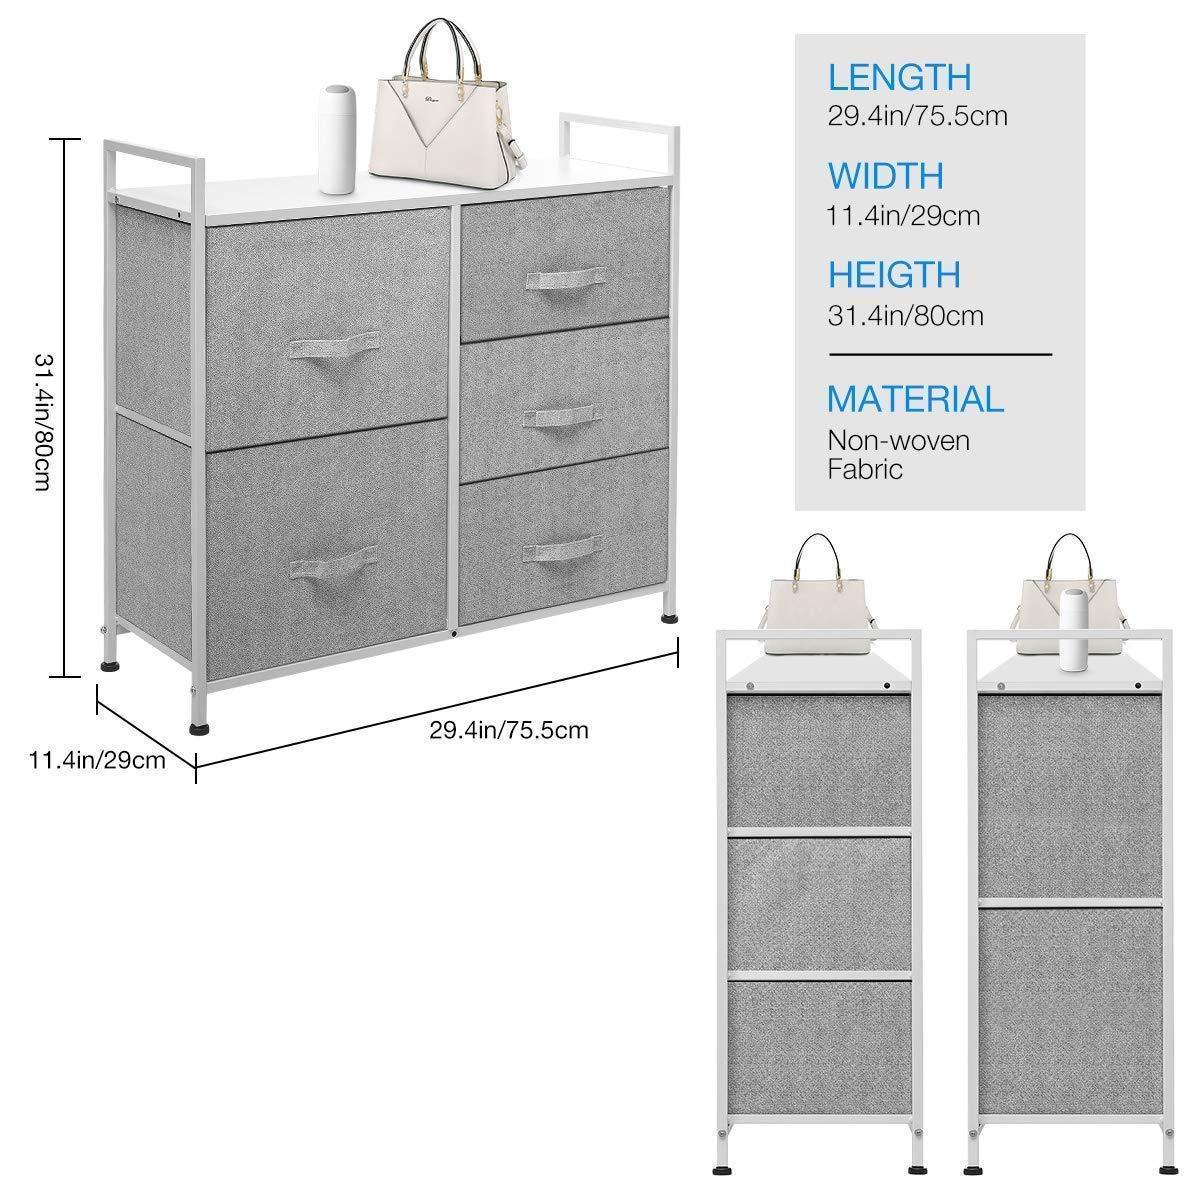 Amazon best kingso fabric 5 drawer dresser storage tower organizer unit with sturdy steel frame and easy pull faux linen drawers for bedroom living room guest room dorm closet grey